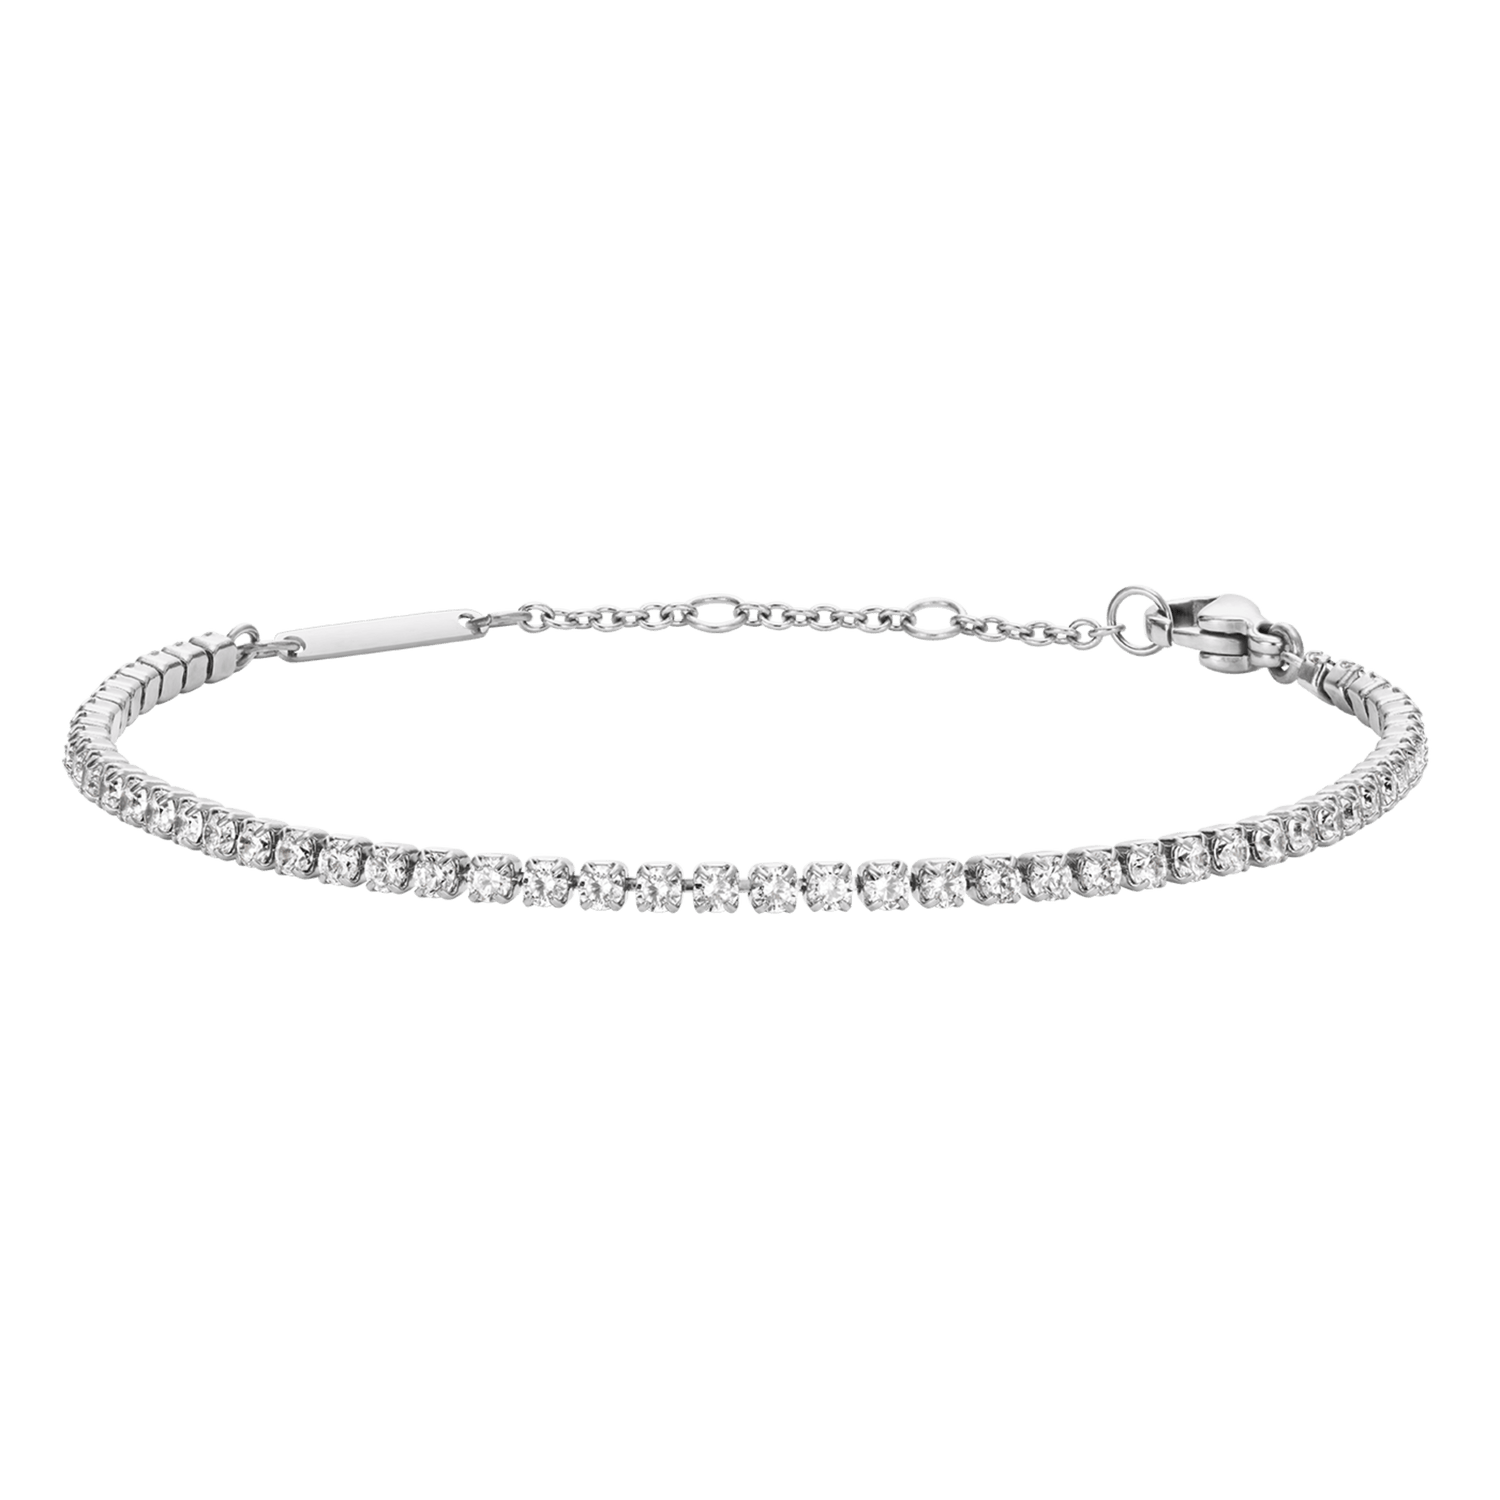 Crystal Letter M Silver Delicate Chain Bracelet in White Crystal